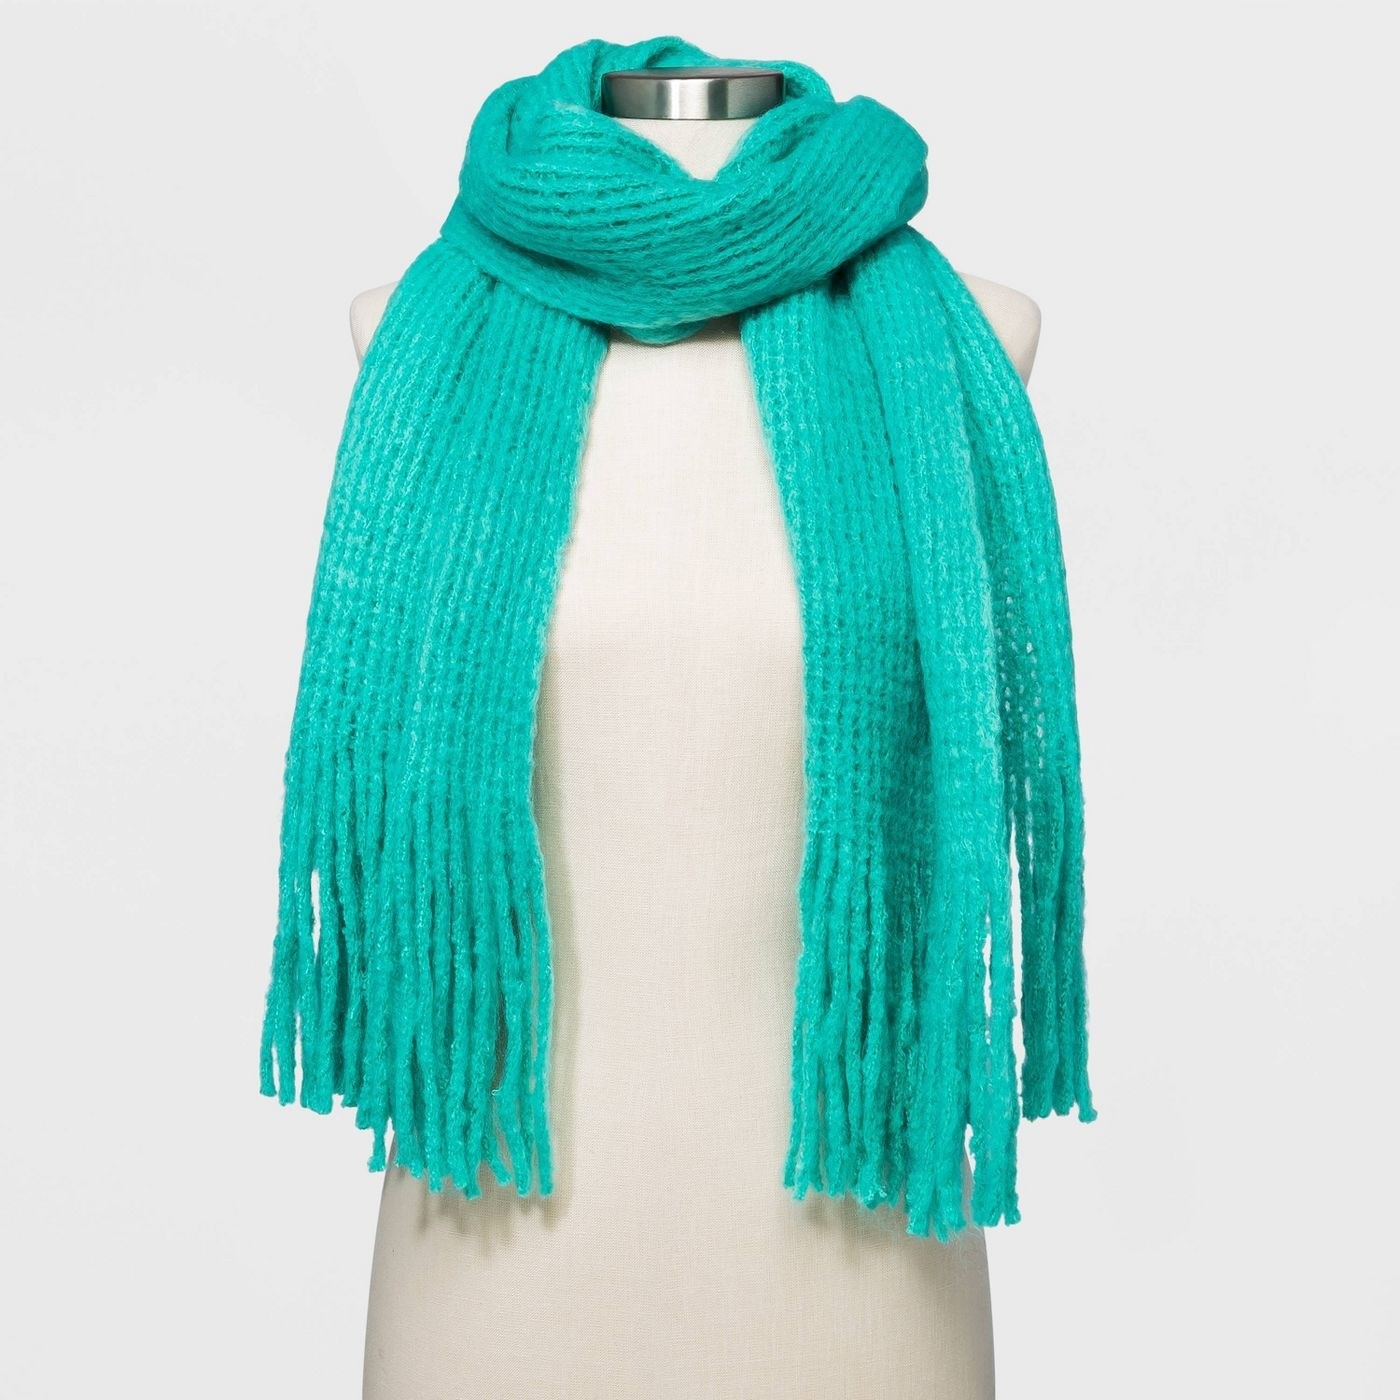 The green solid blanket scarf